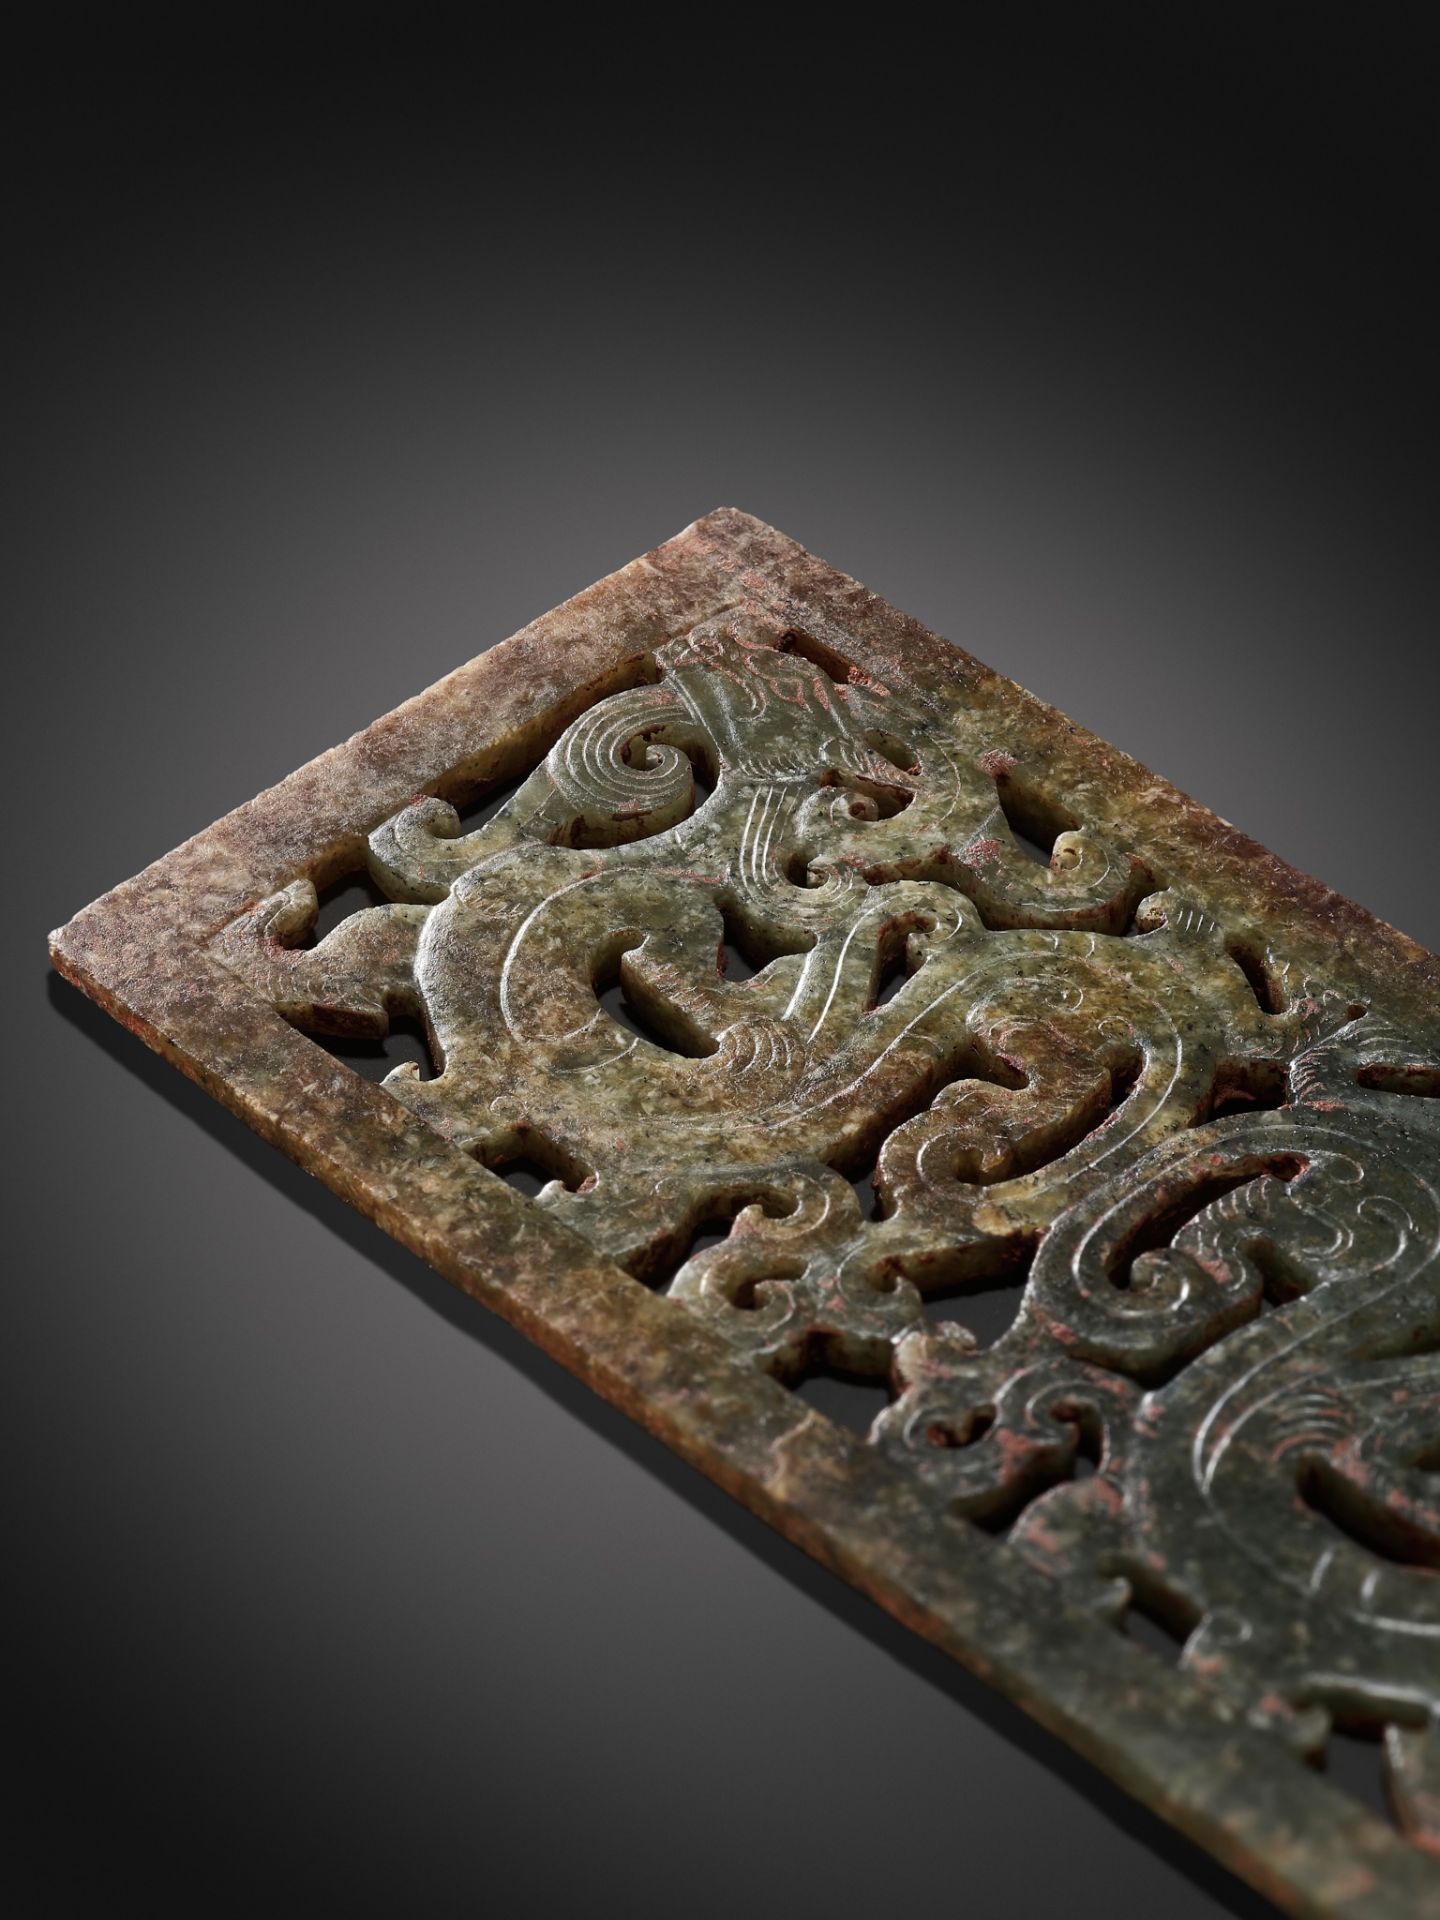 A RECTANGULAR GREEN JADE 'DOUBLE DRAGON' PLAQUE, LATE WARRING STATES PERIOD TO EARLY WESTERN HAN DYN